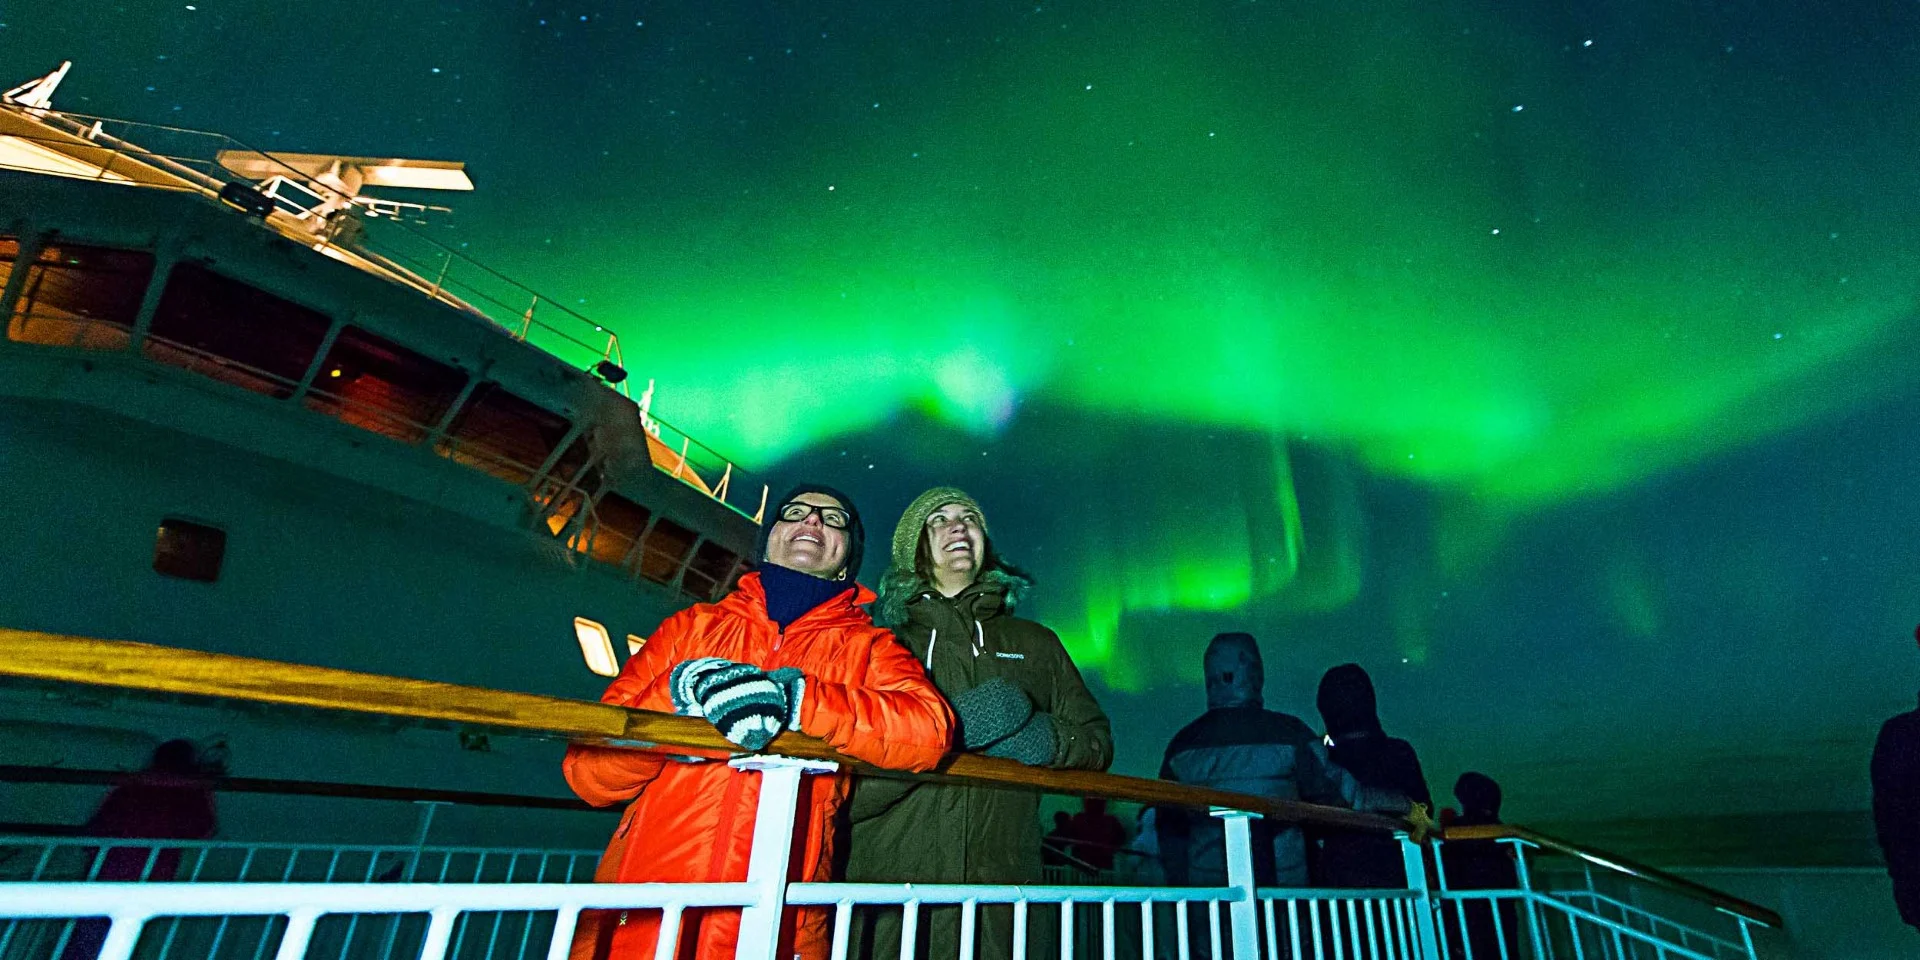 Winter expedition with Northern Light / Aurora Borealis